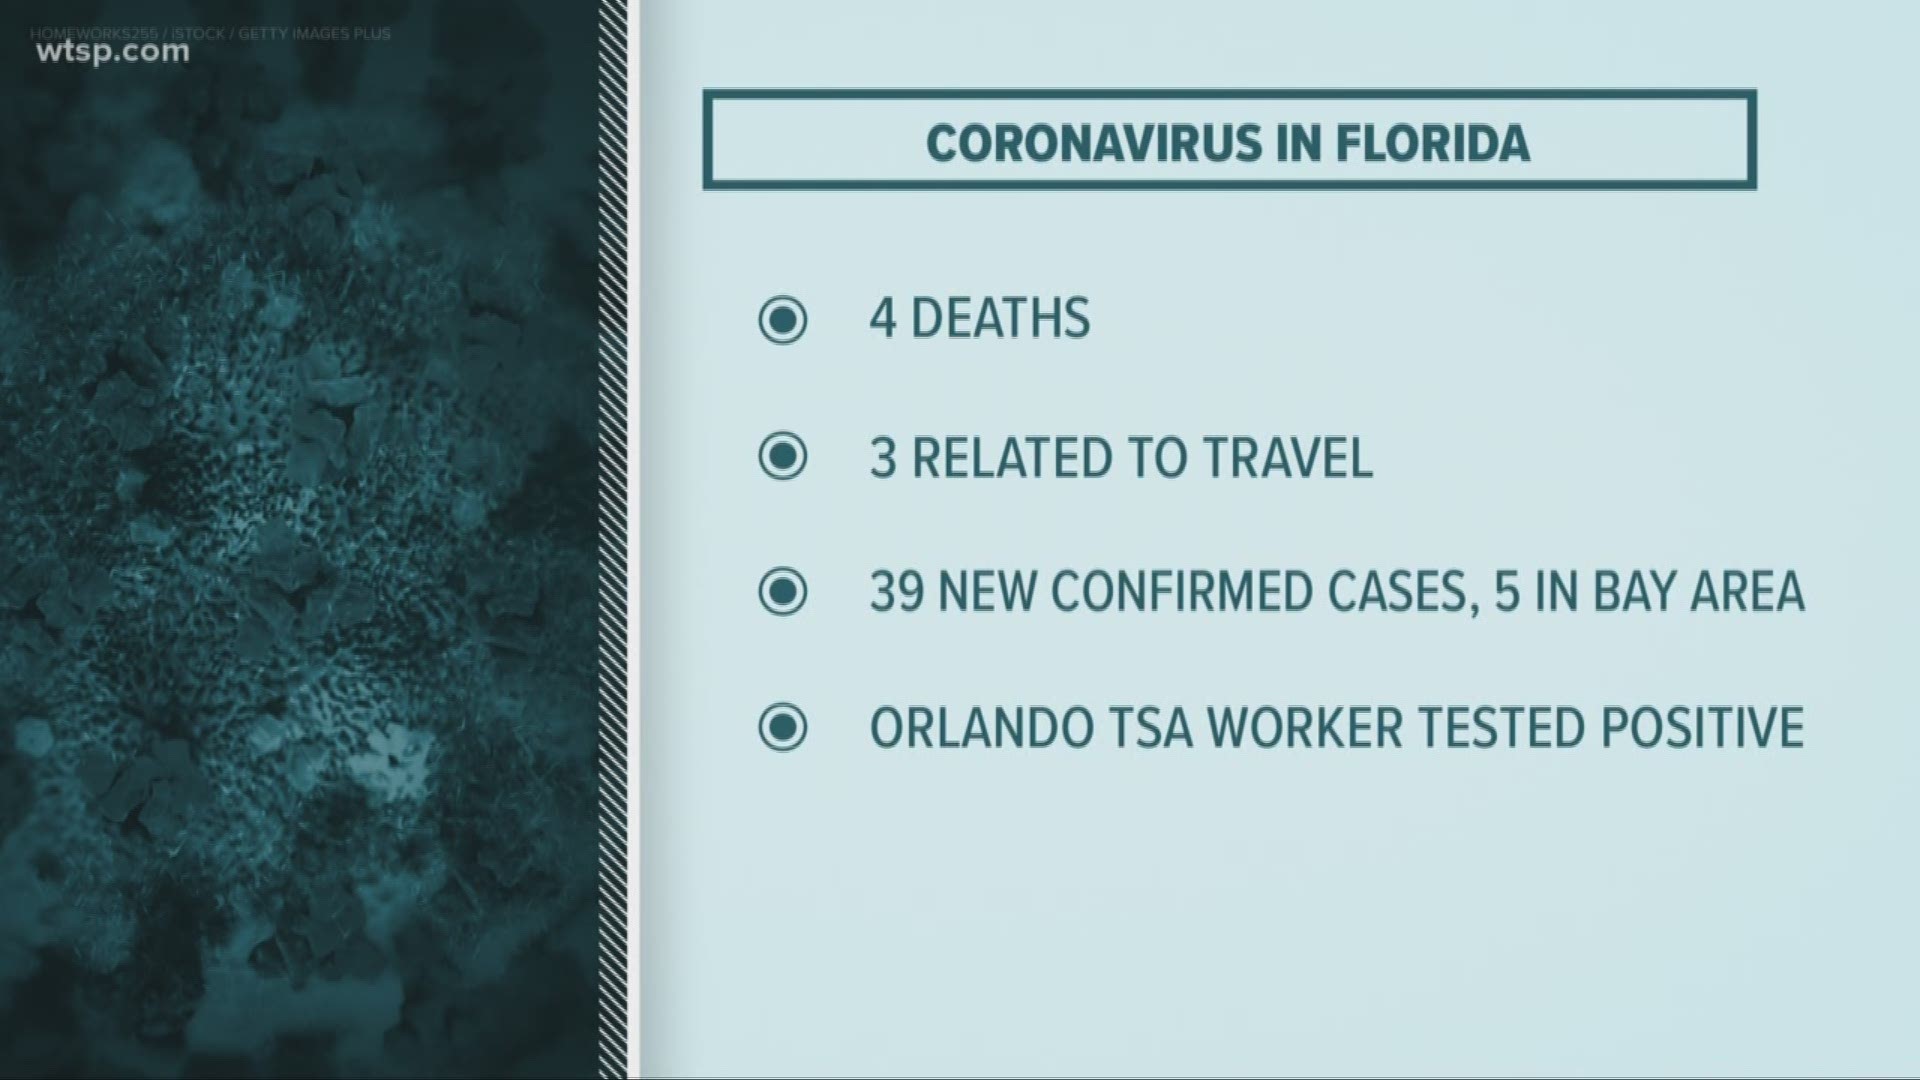 Of the 39 new cases, three are in Hillsborough County and one each in Citrus and Pasco counties.